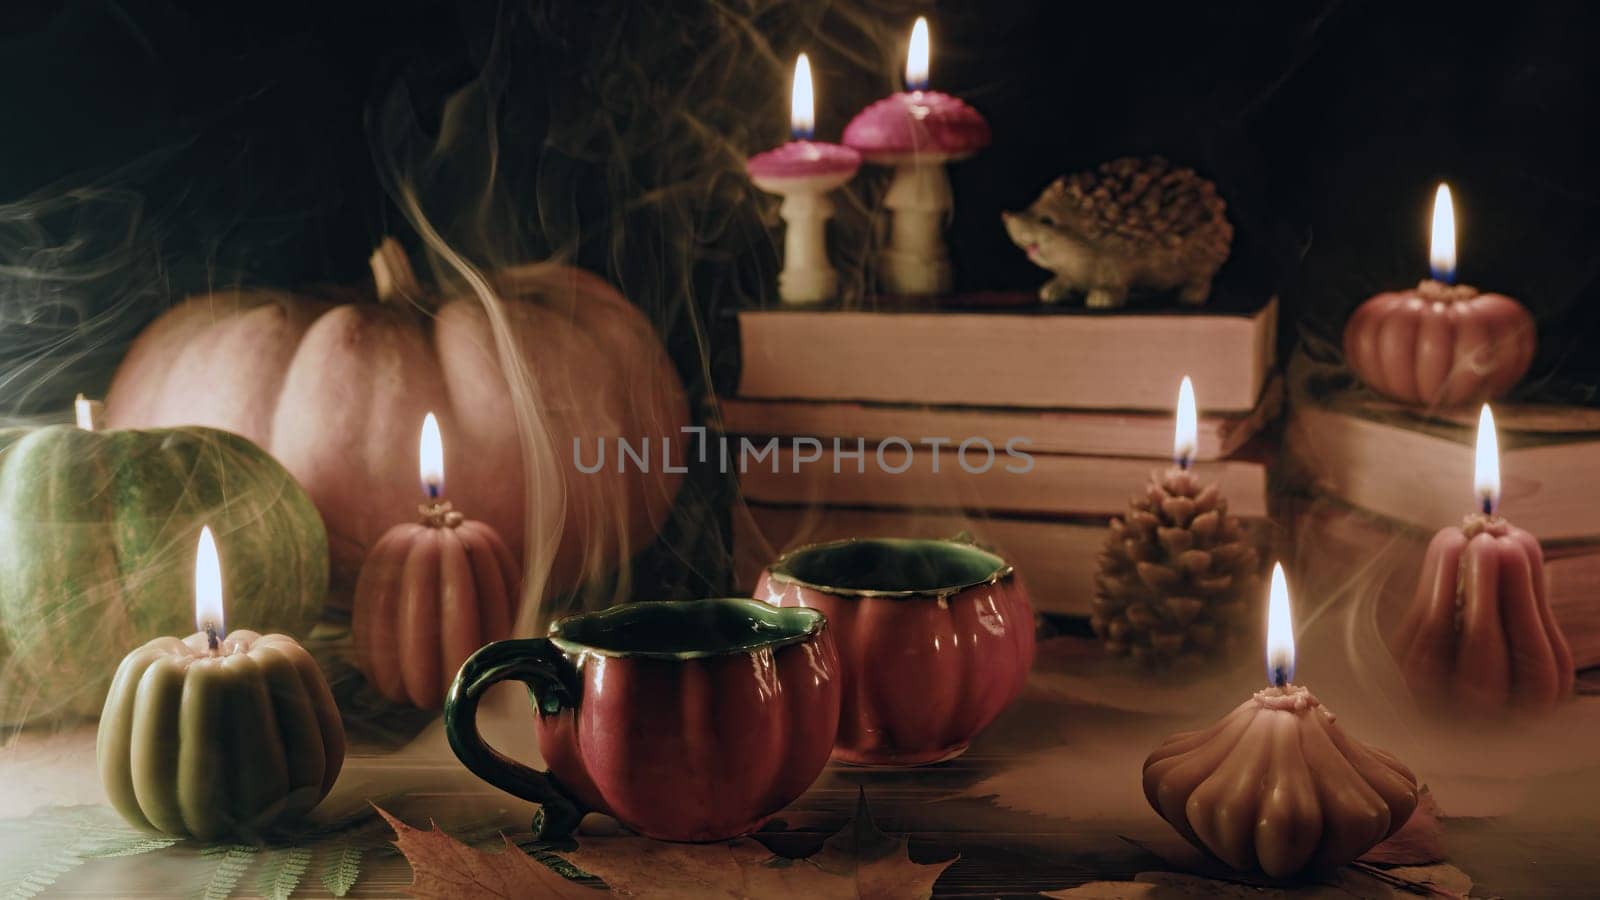 Cute cups of tea among pumpkin candles. Autumn-themed content, cafe promotions by kristina_kokhanova